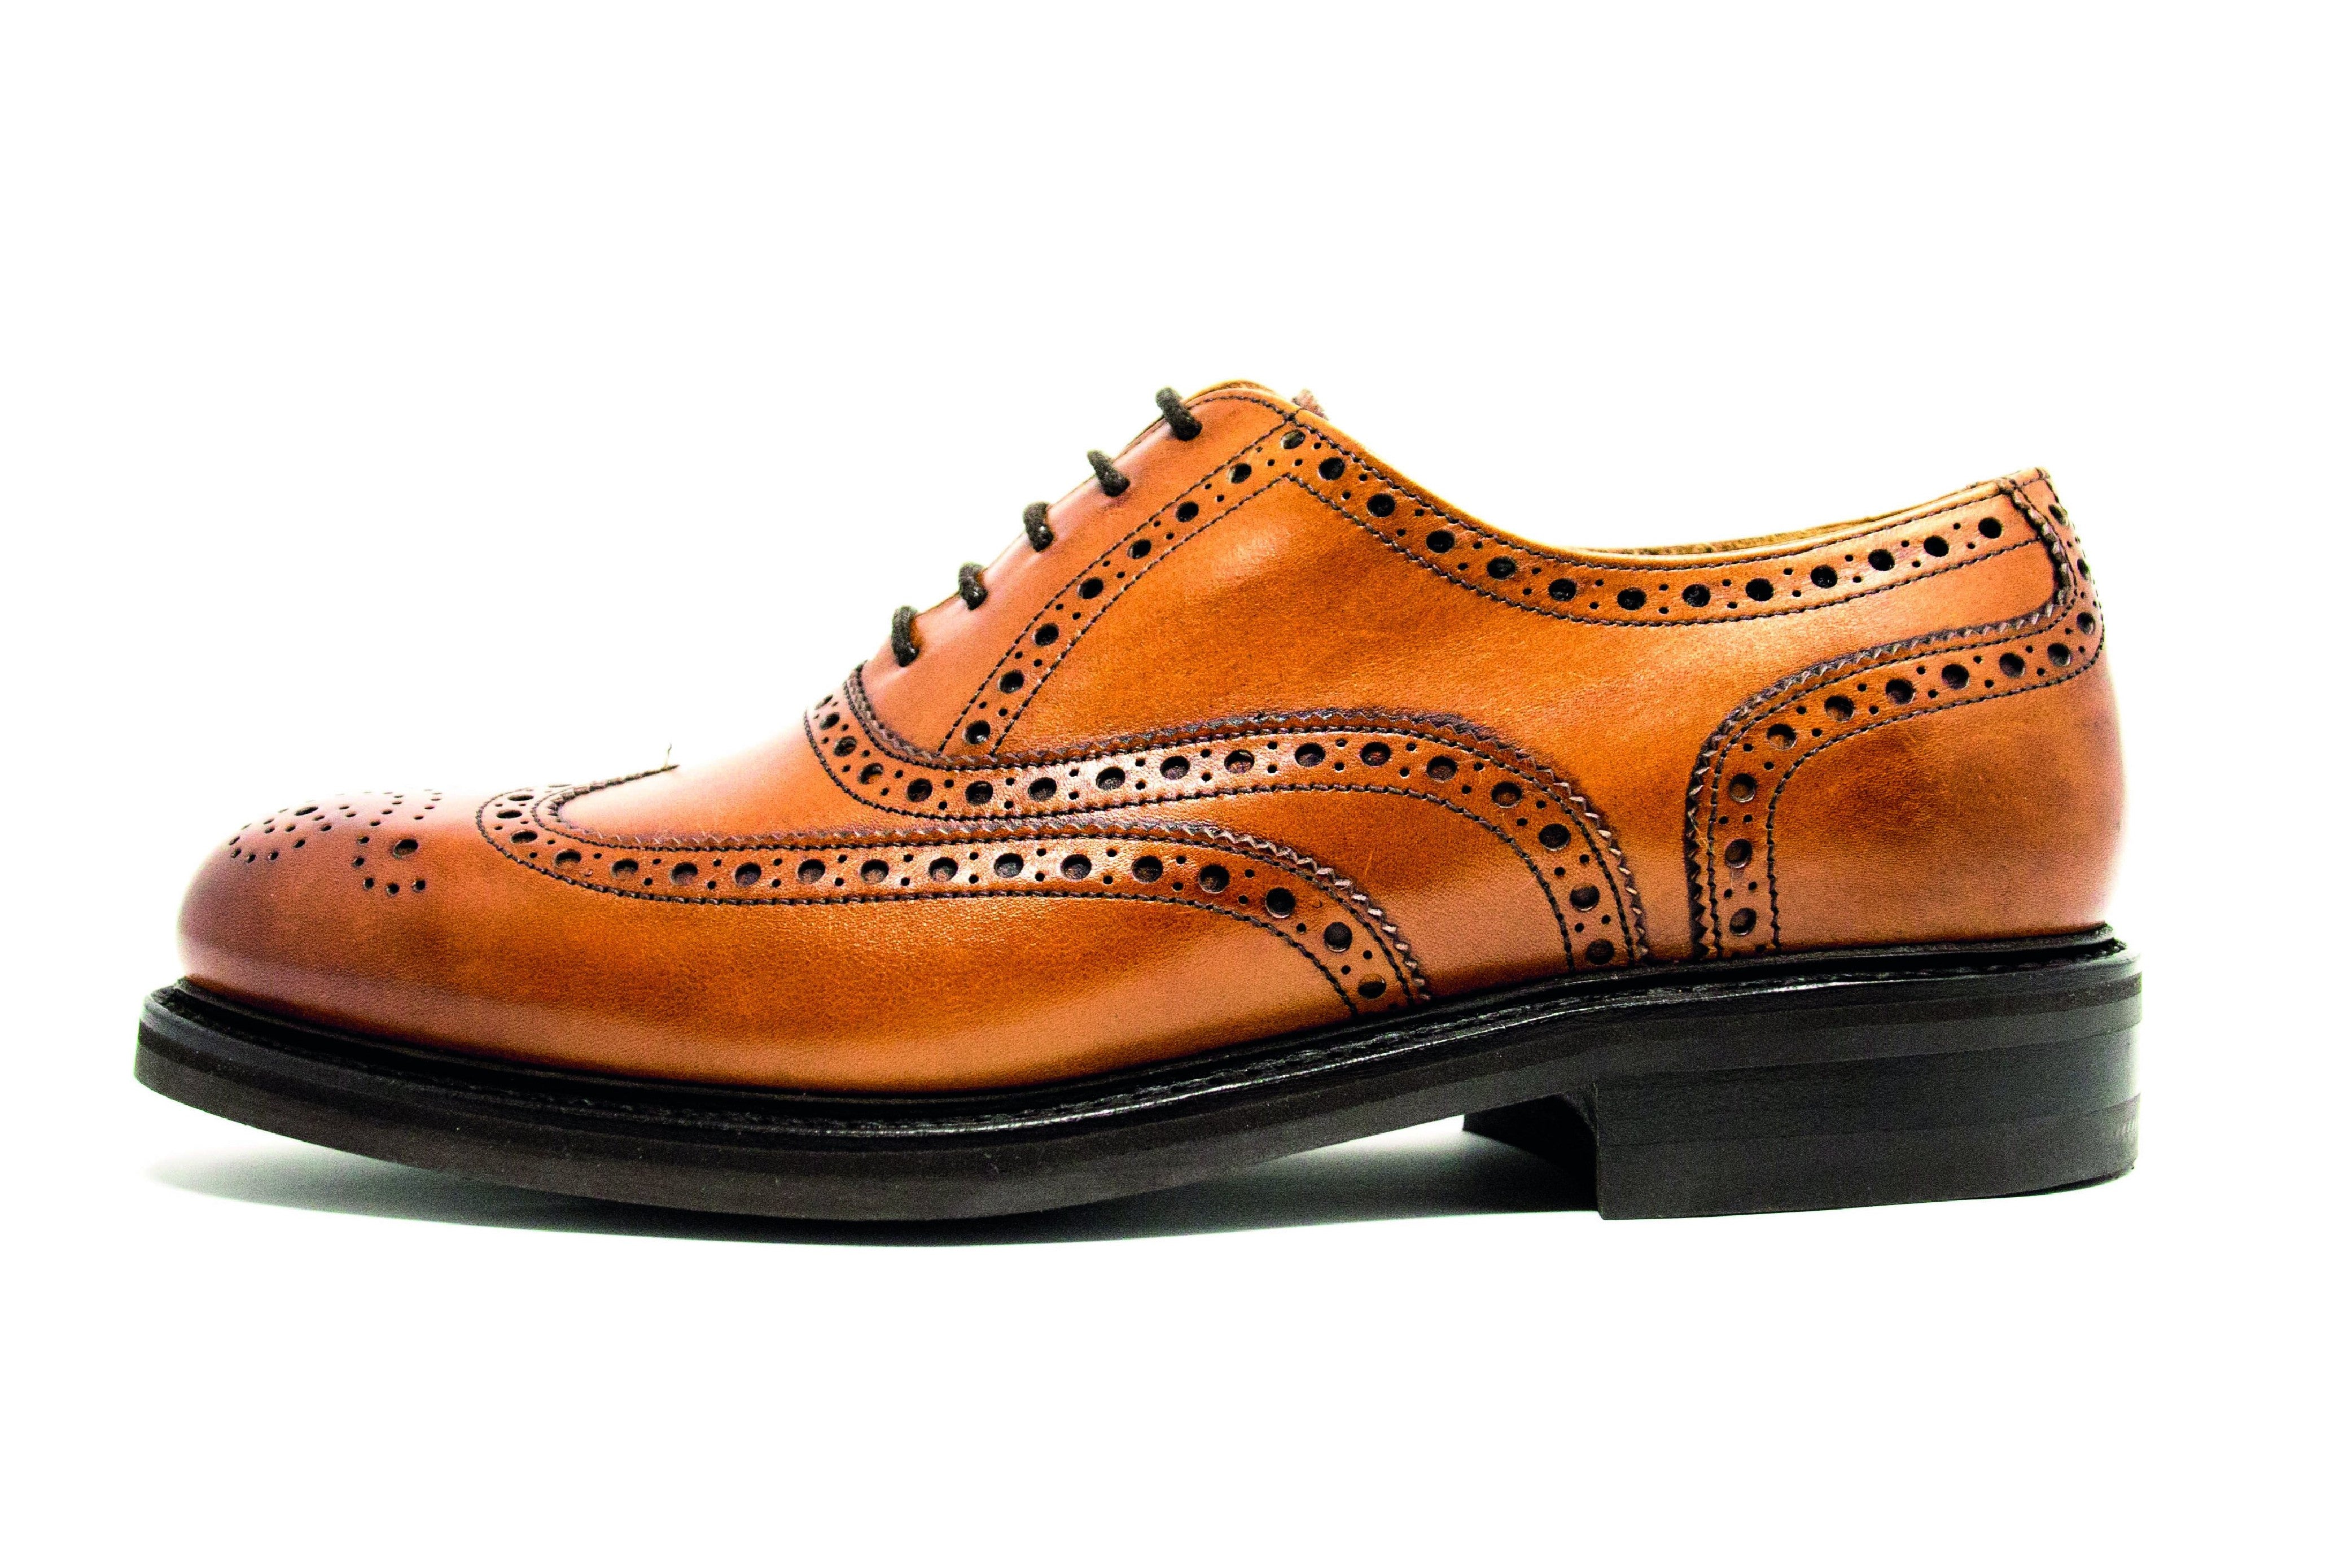 oxford and brogues